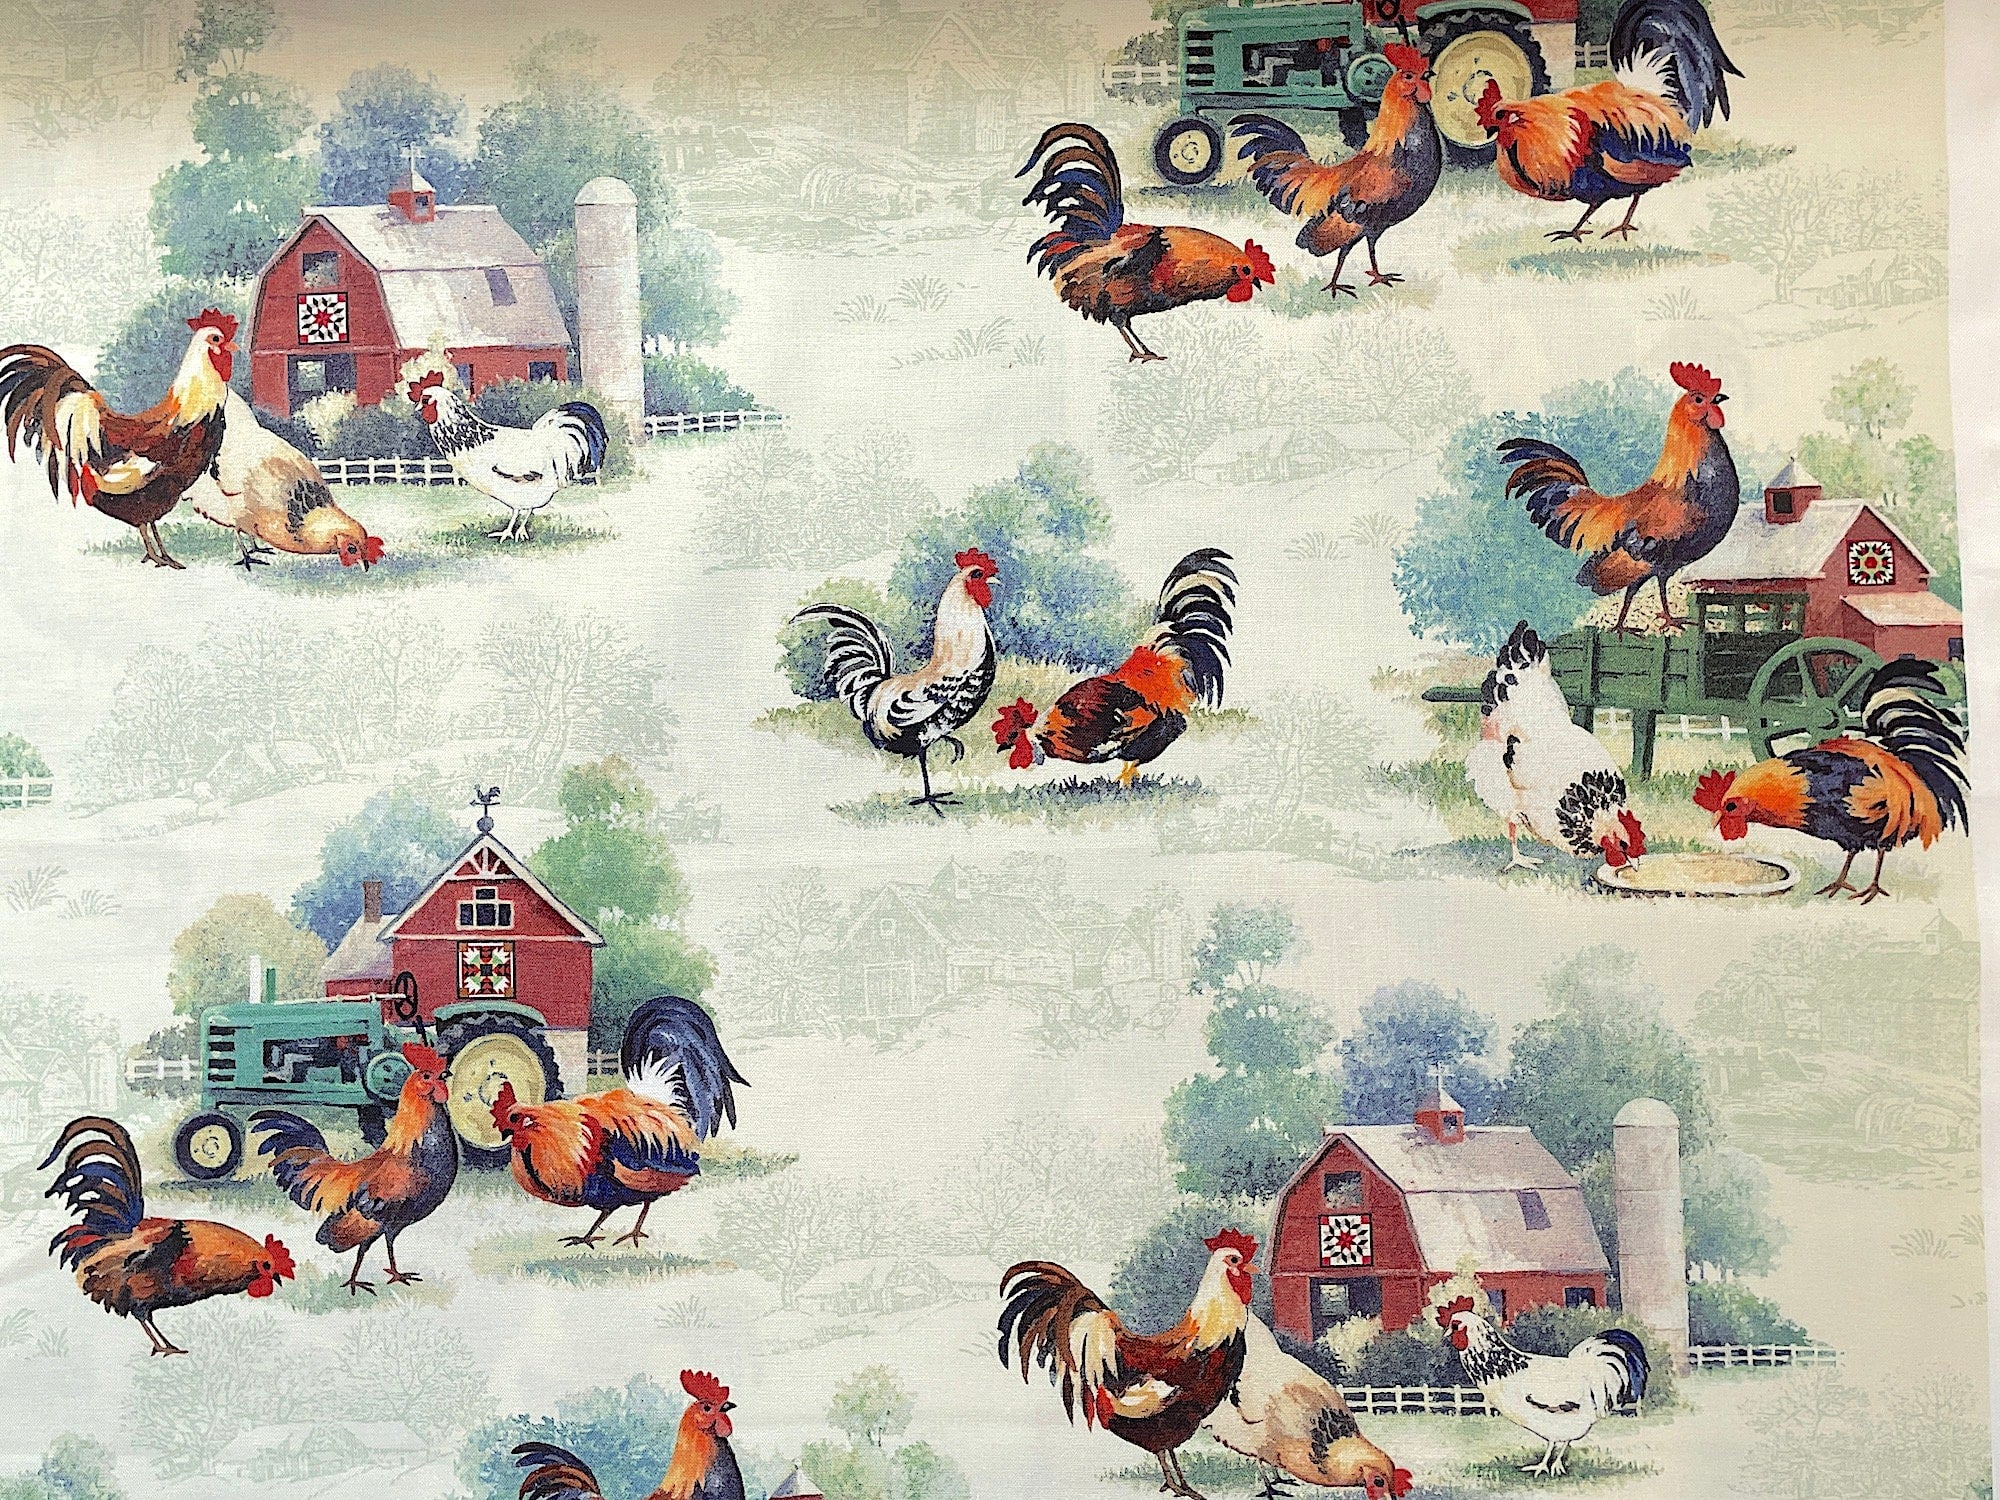 This fabric is part of the Rooster Farm House collection. This cream colored fabric is covered with roosters, barns, grass, trees and more.